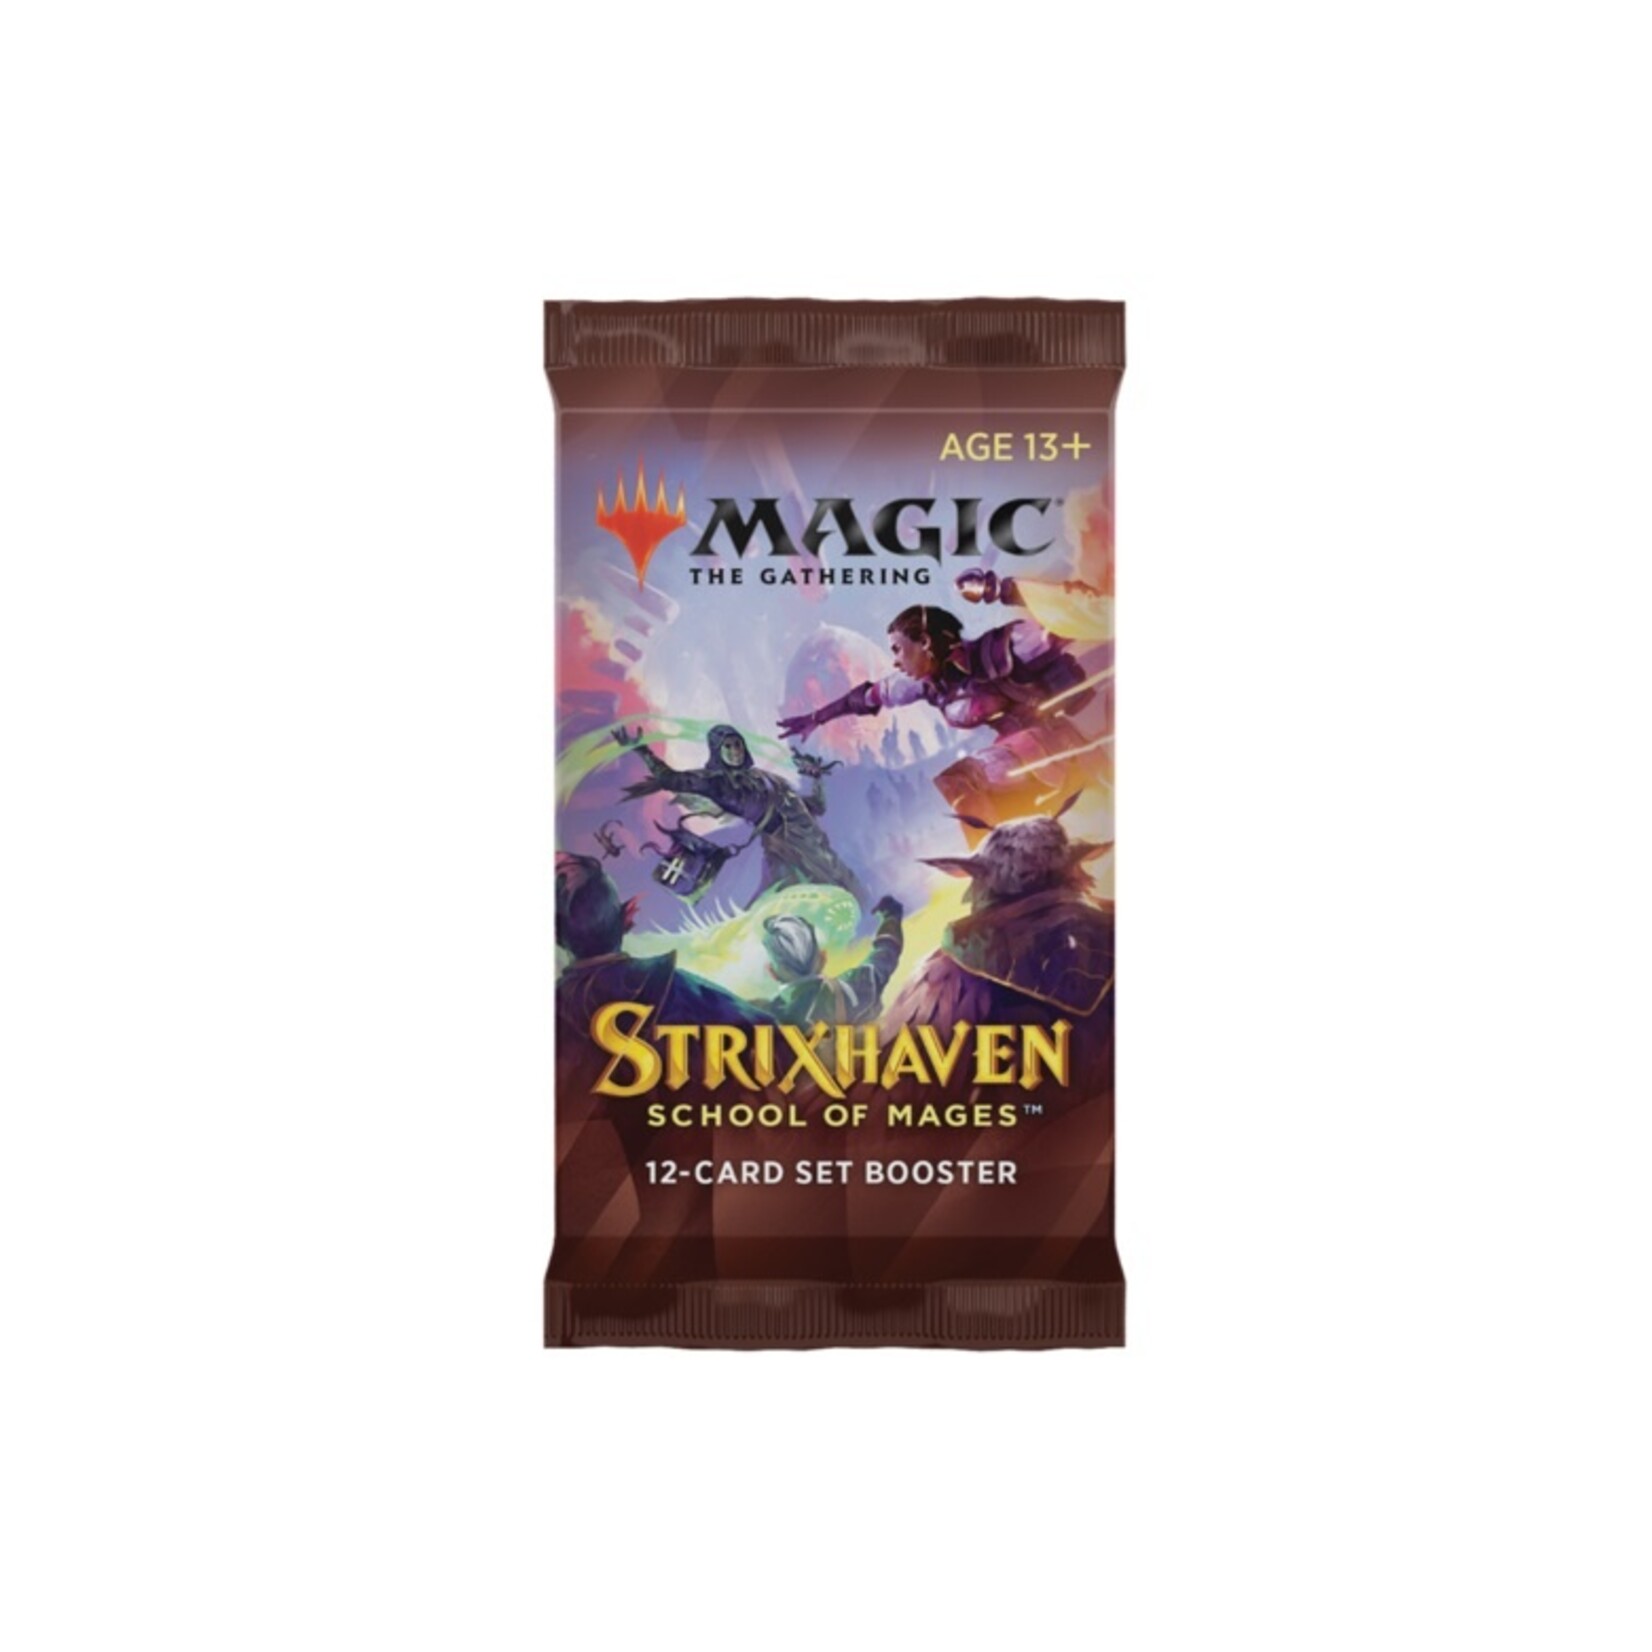 Wizard of the coast Magic the gathering Set booster - Strixhaven - School of mages